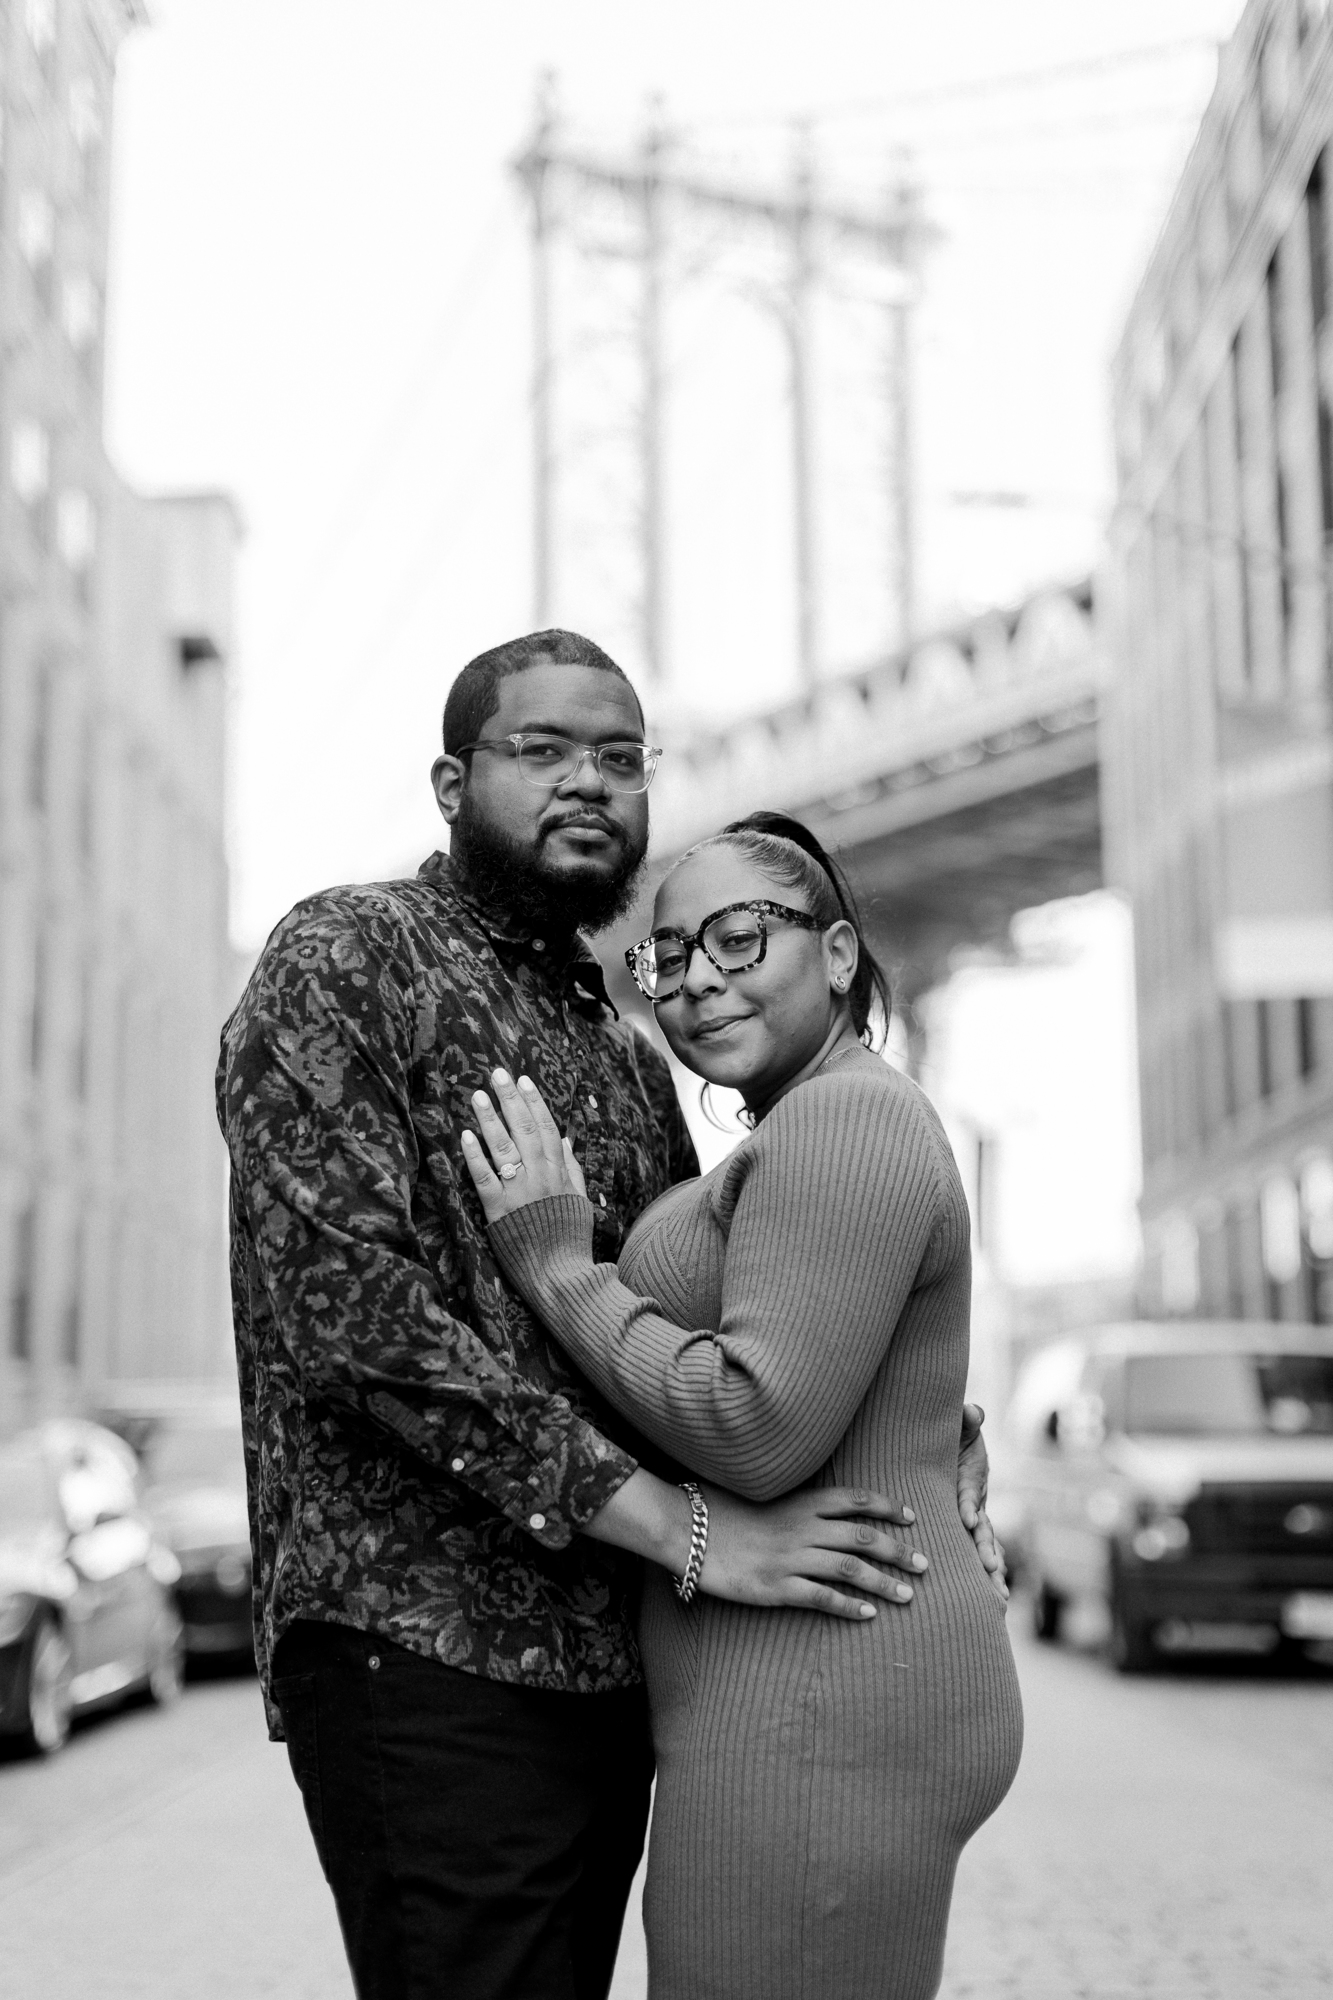 Flawless Autumn DUMBO Engagement Photography at the Brooklyn Bridge